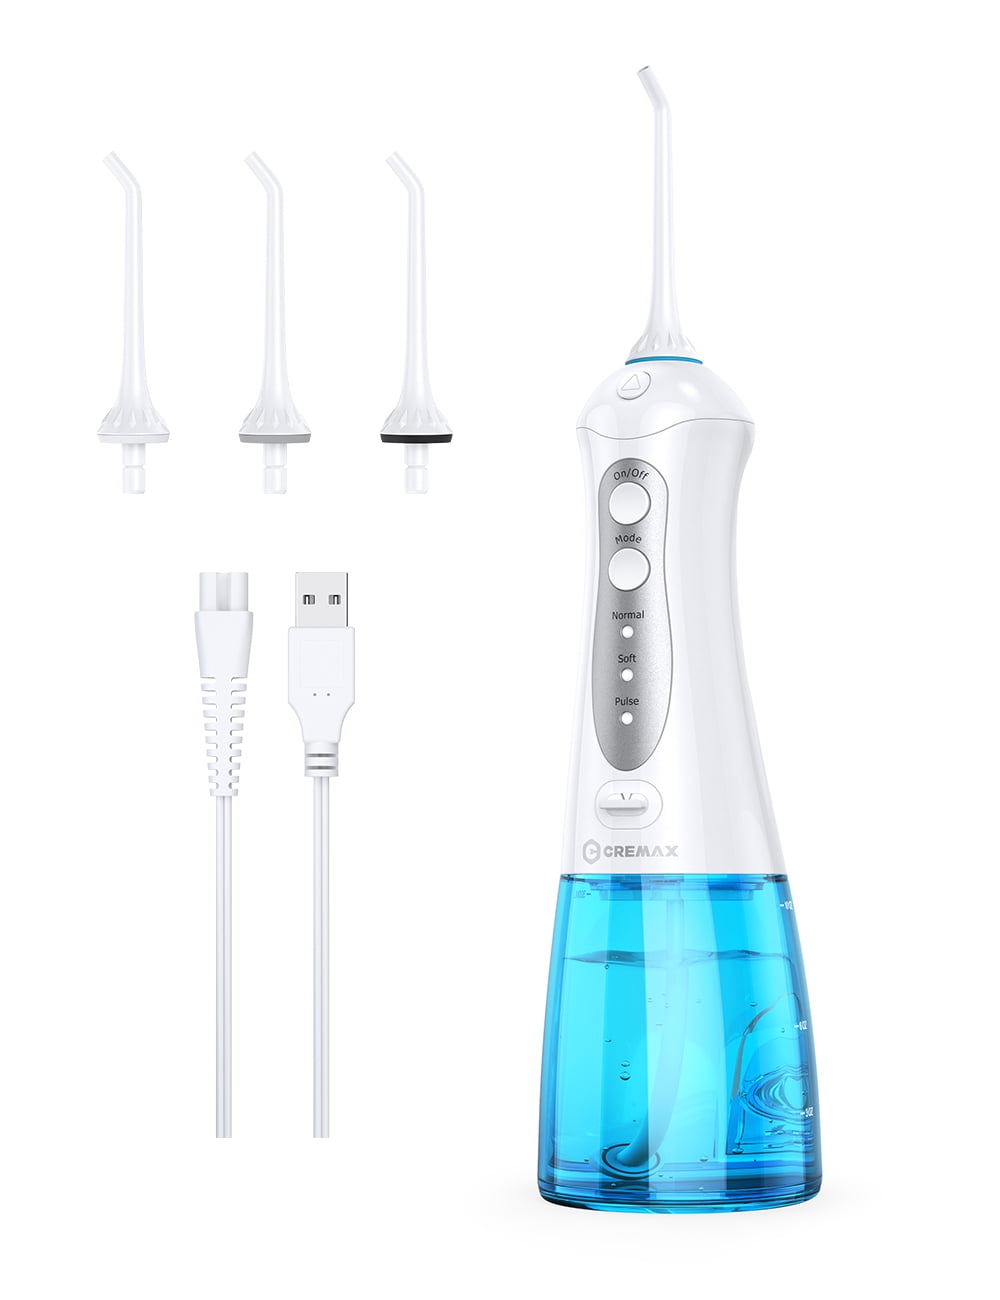 Water Flosser Professional for Teeth, [Powerful Cleaning Series] CREMAX Cordless Dental Oral Irrigator, 300ML Portable and Rechargeable IPX7 Waterproof Teeth Cleaner for Travel Home Braces Walmart.com